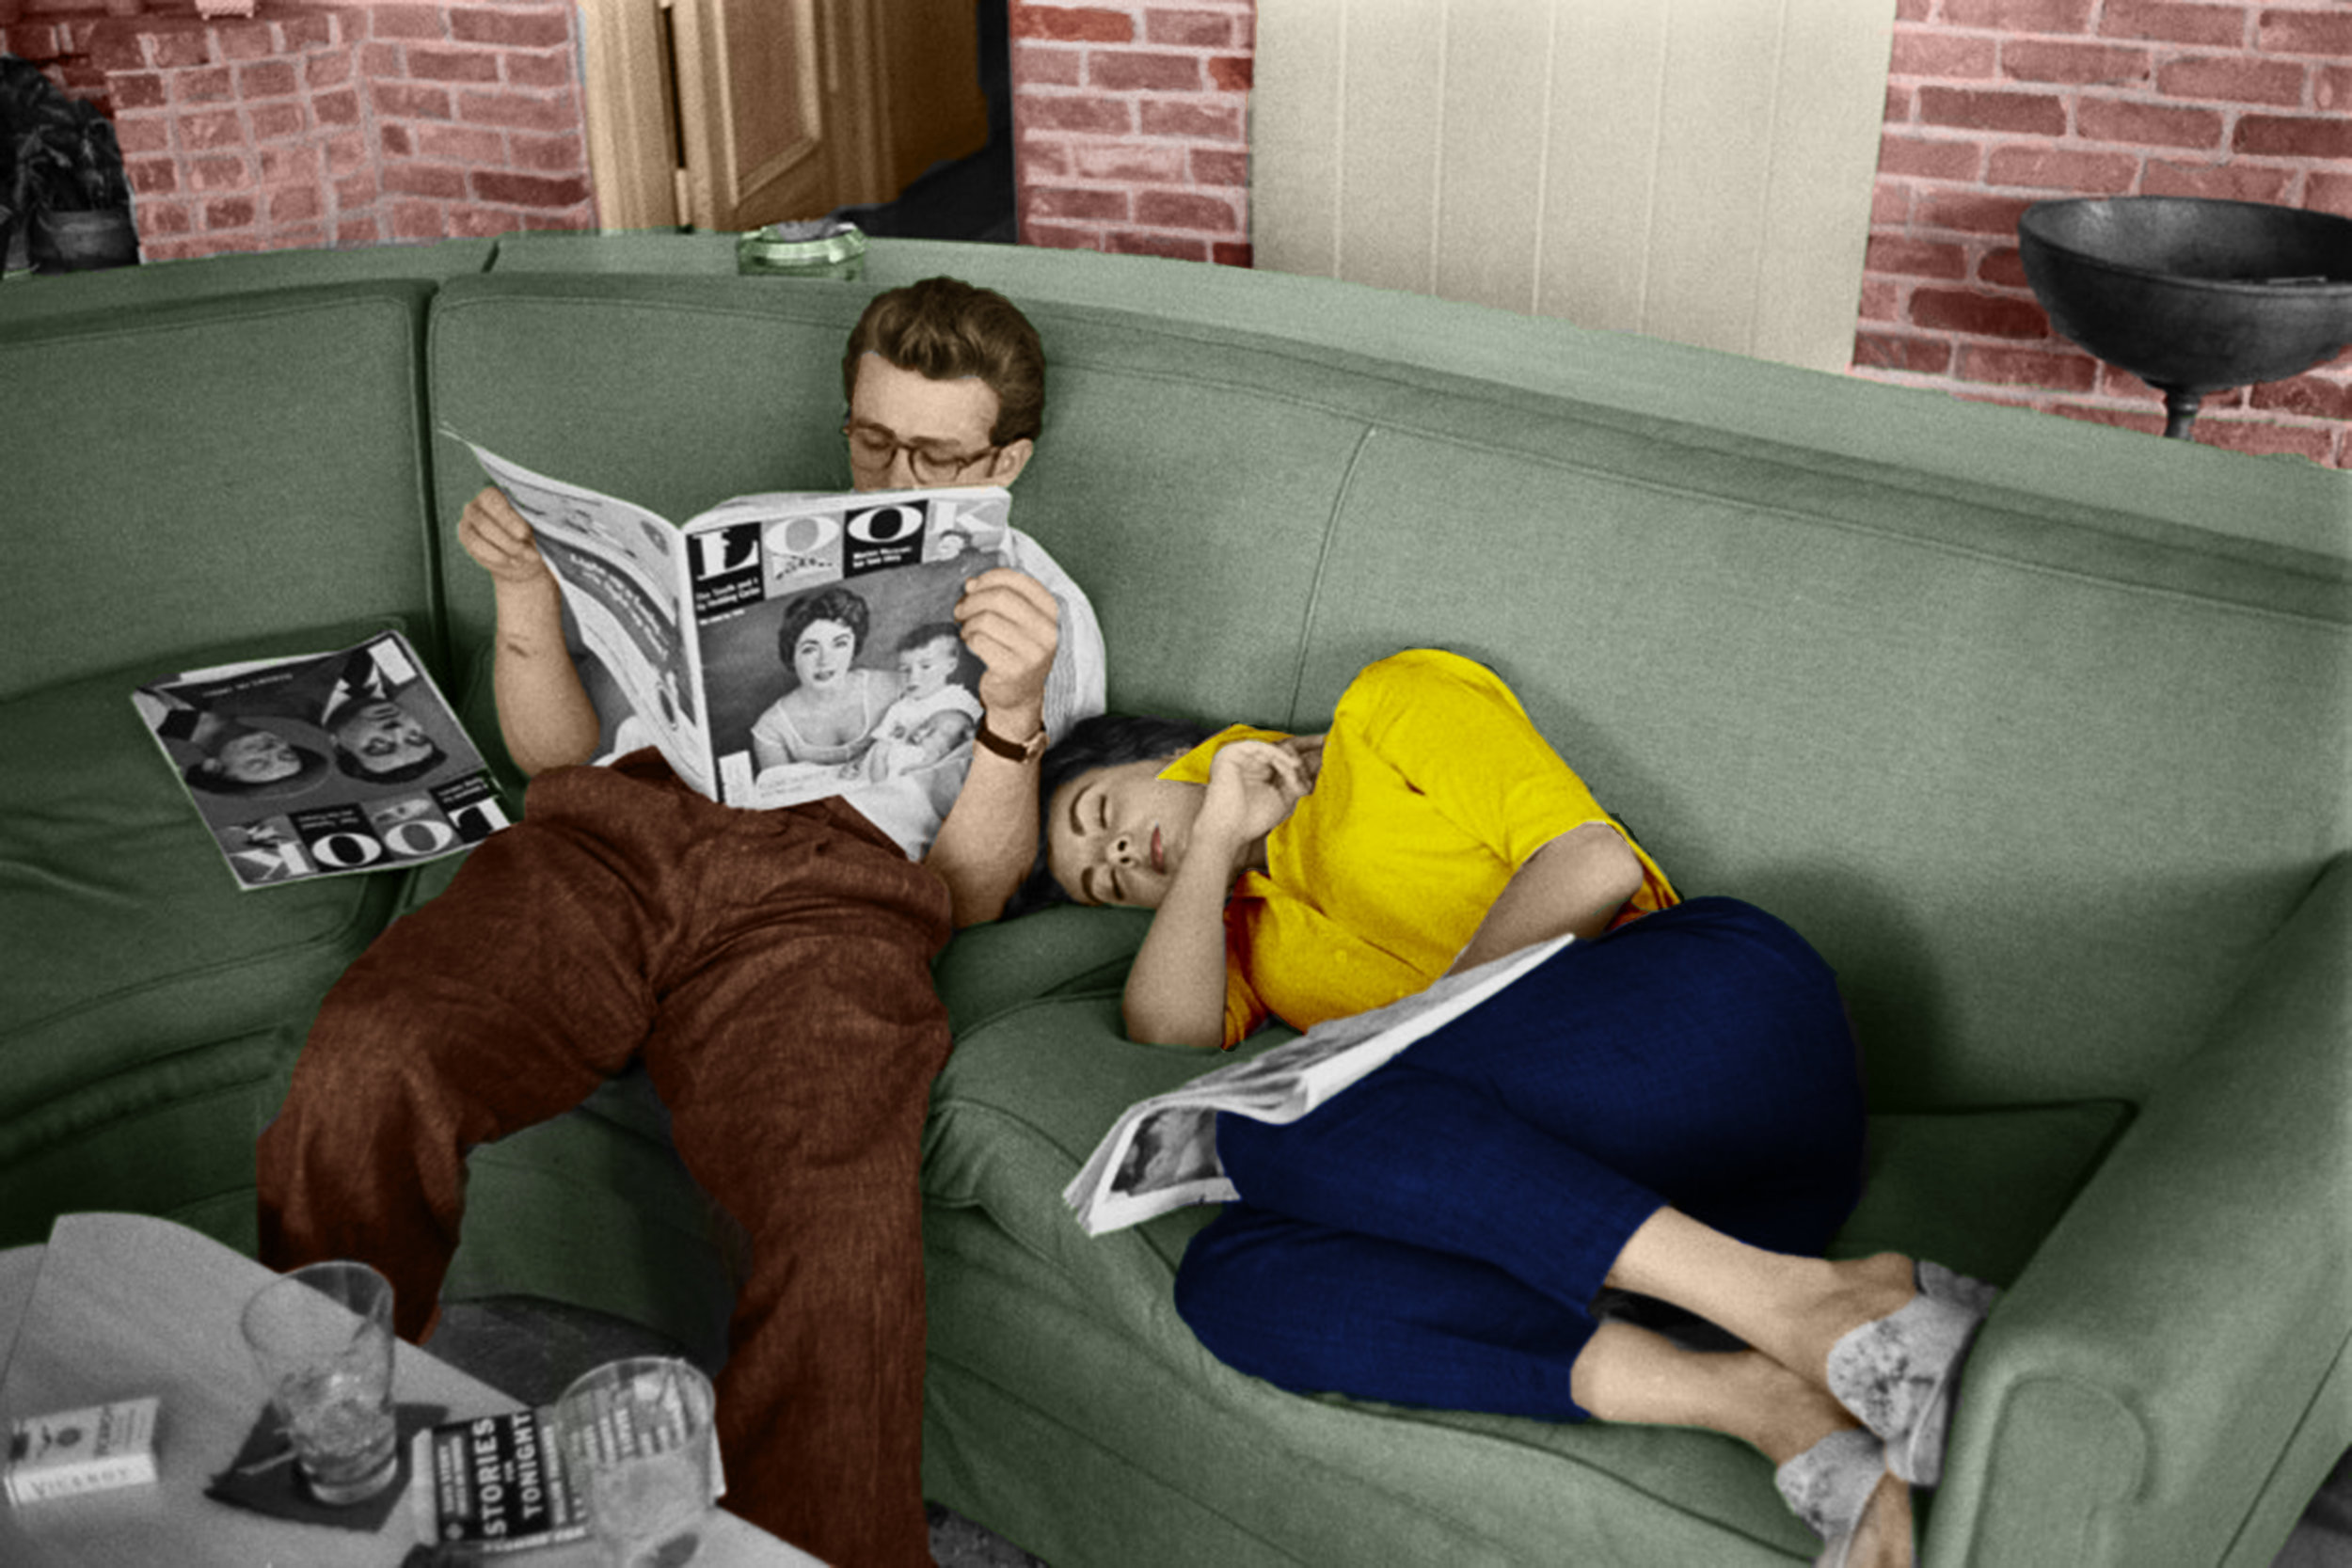  Re-coloring a black and white photo. The photo was originally black and white as seen in the magazines, I then added color back in 